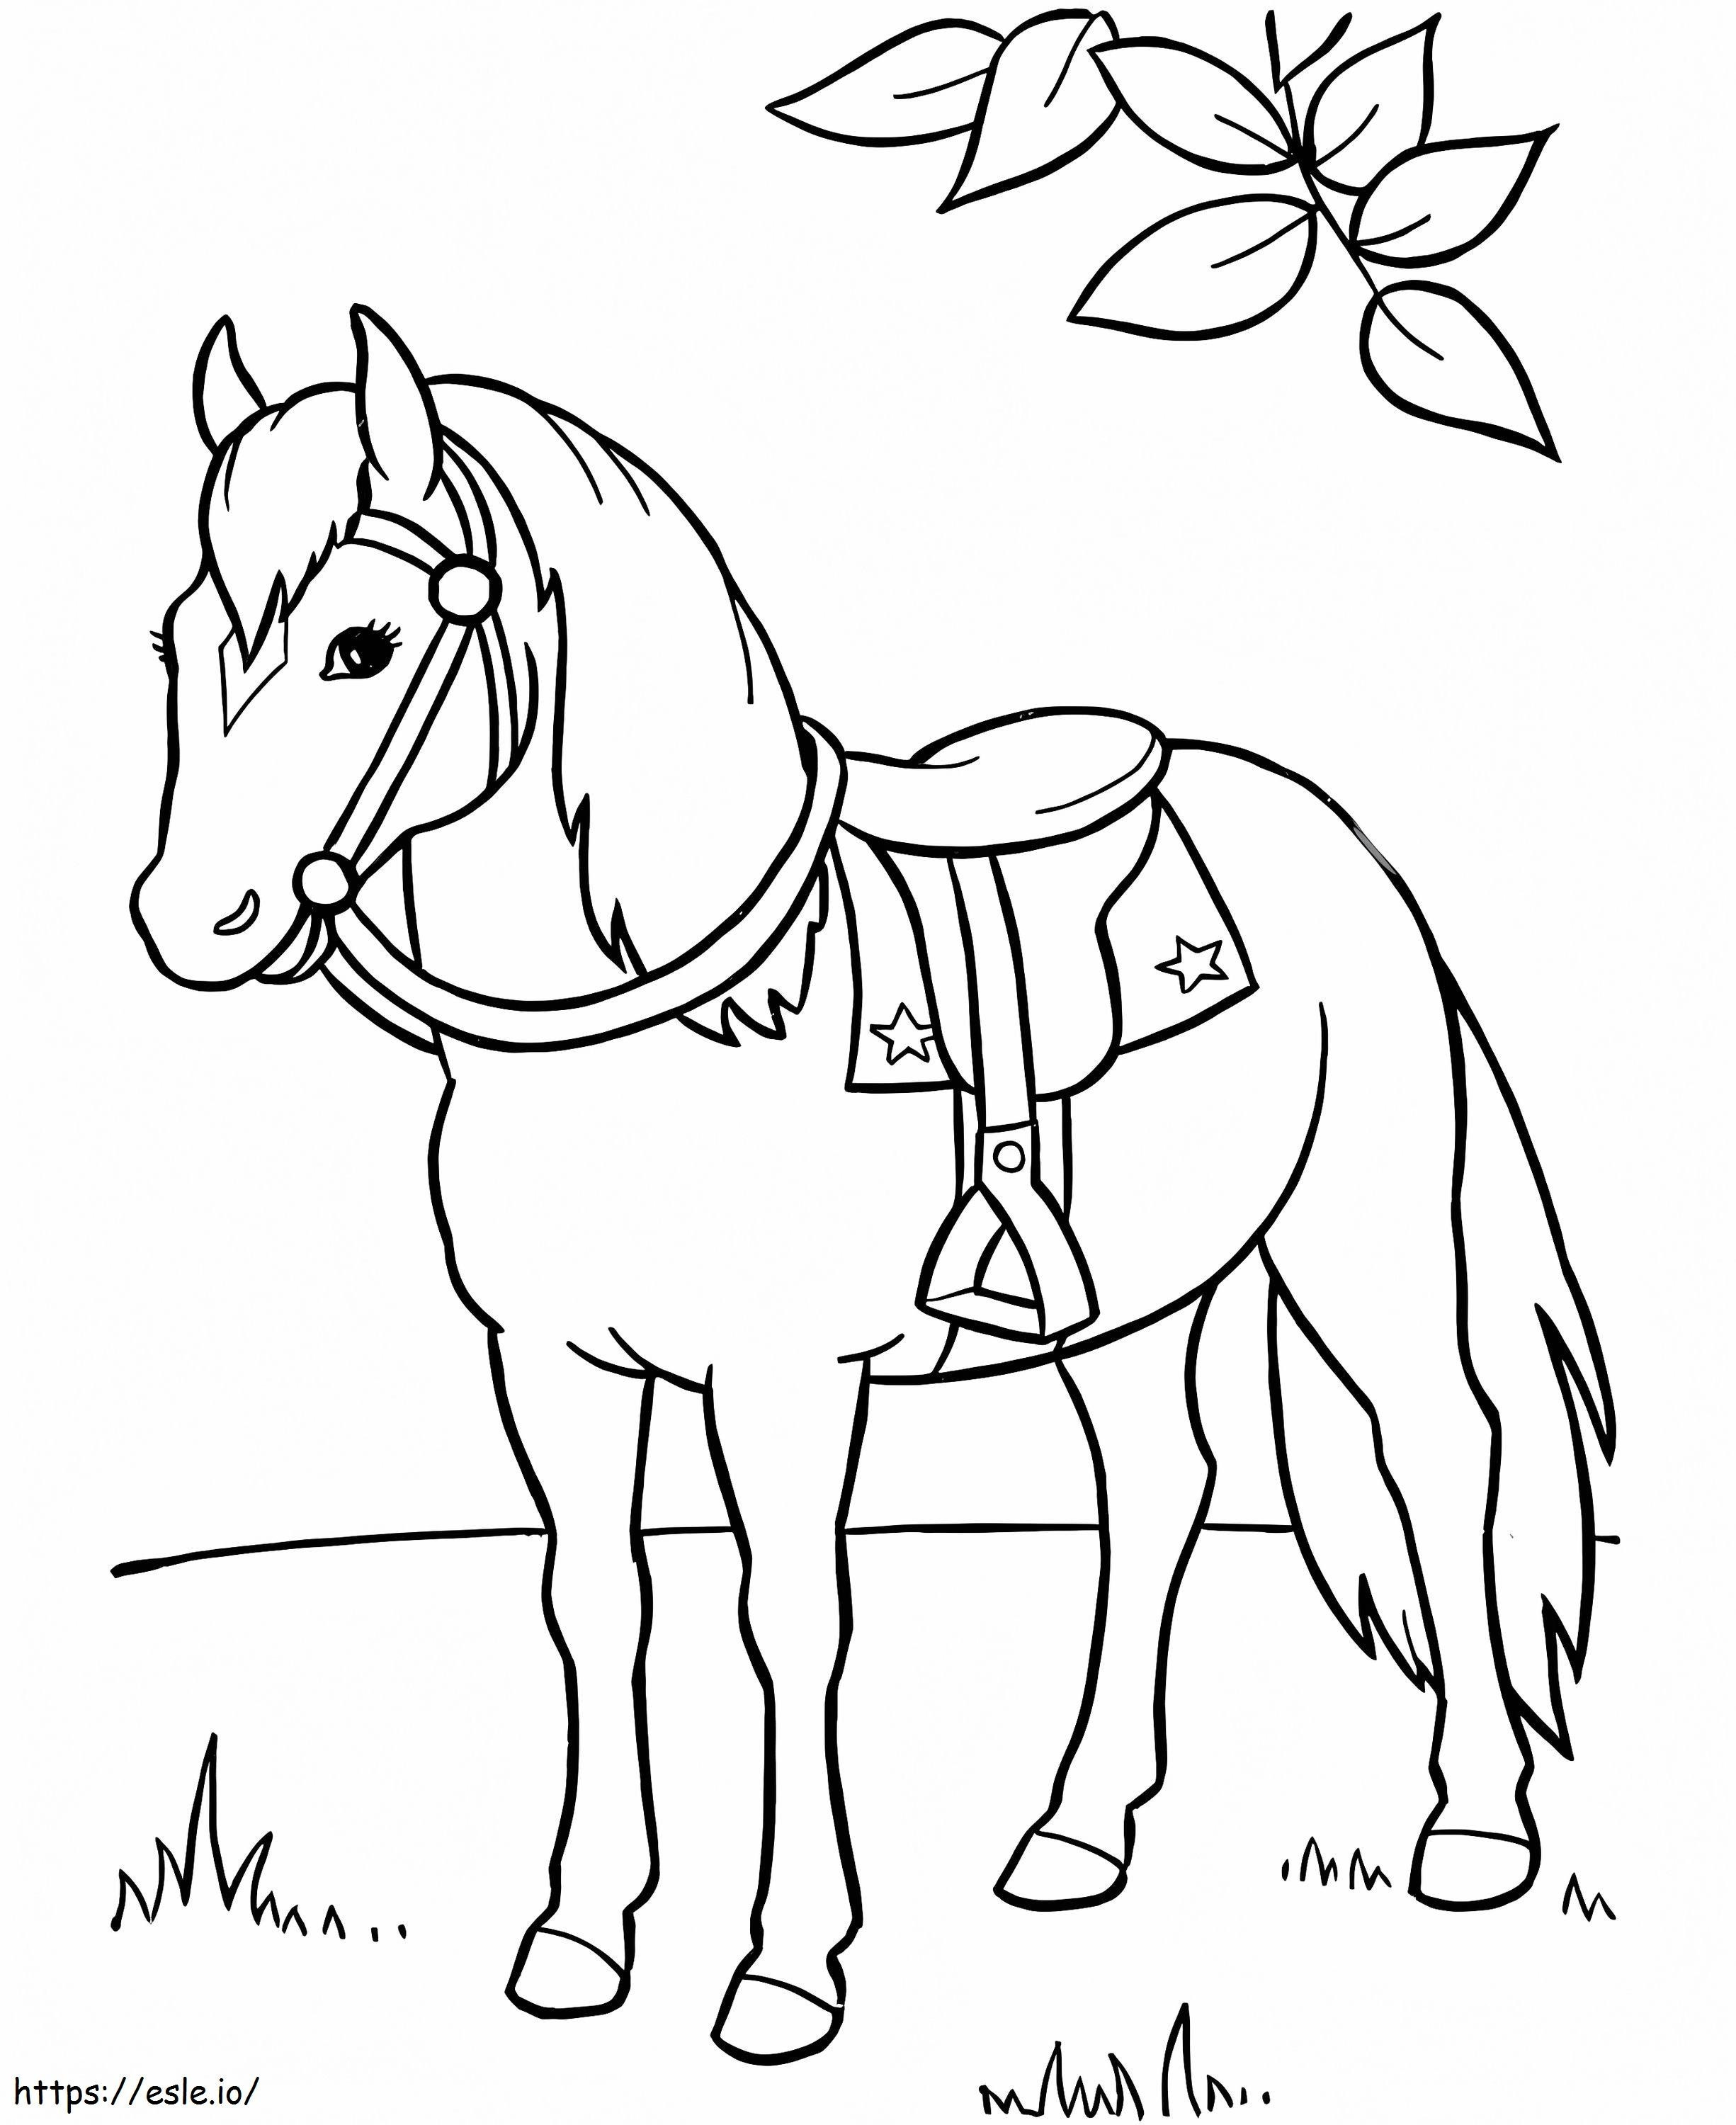 Horse Standing On The Grass coloring page